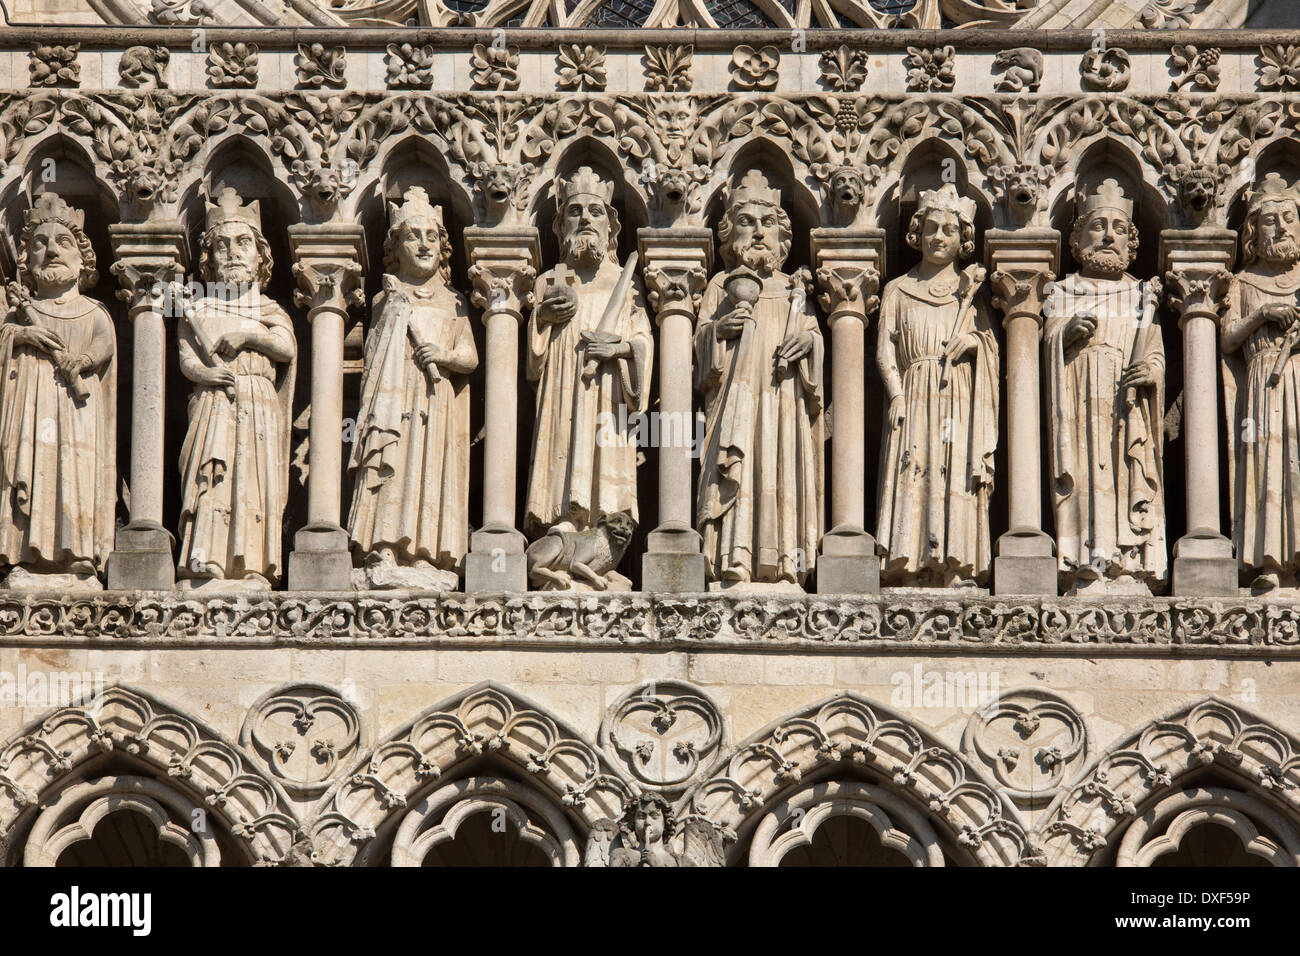 Detail of the sculpture above the central portal of the Cathedrale Notre-Dame in the city of Amiens, Picardy region of France Stock Photo